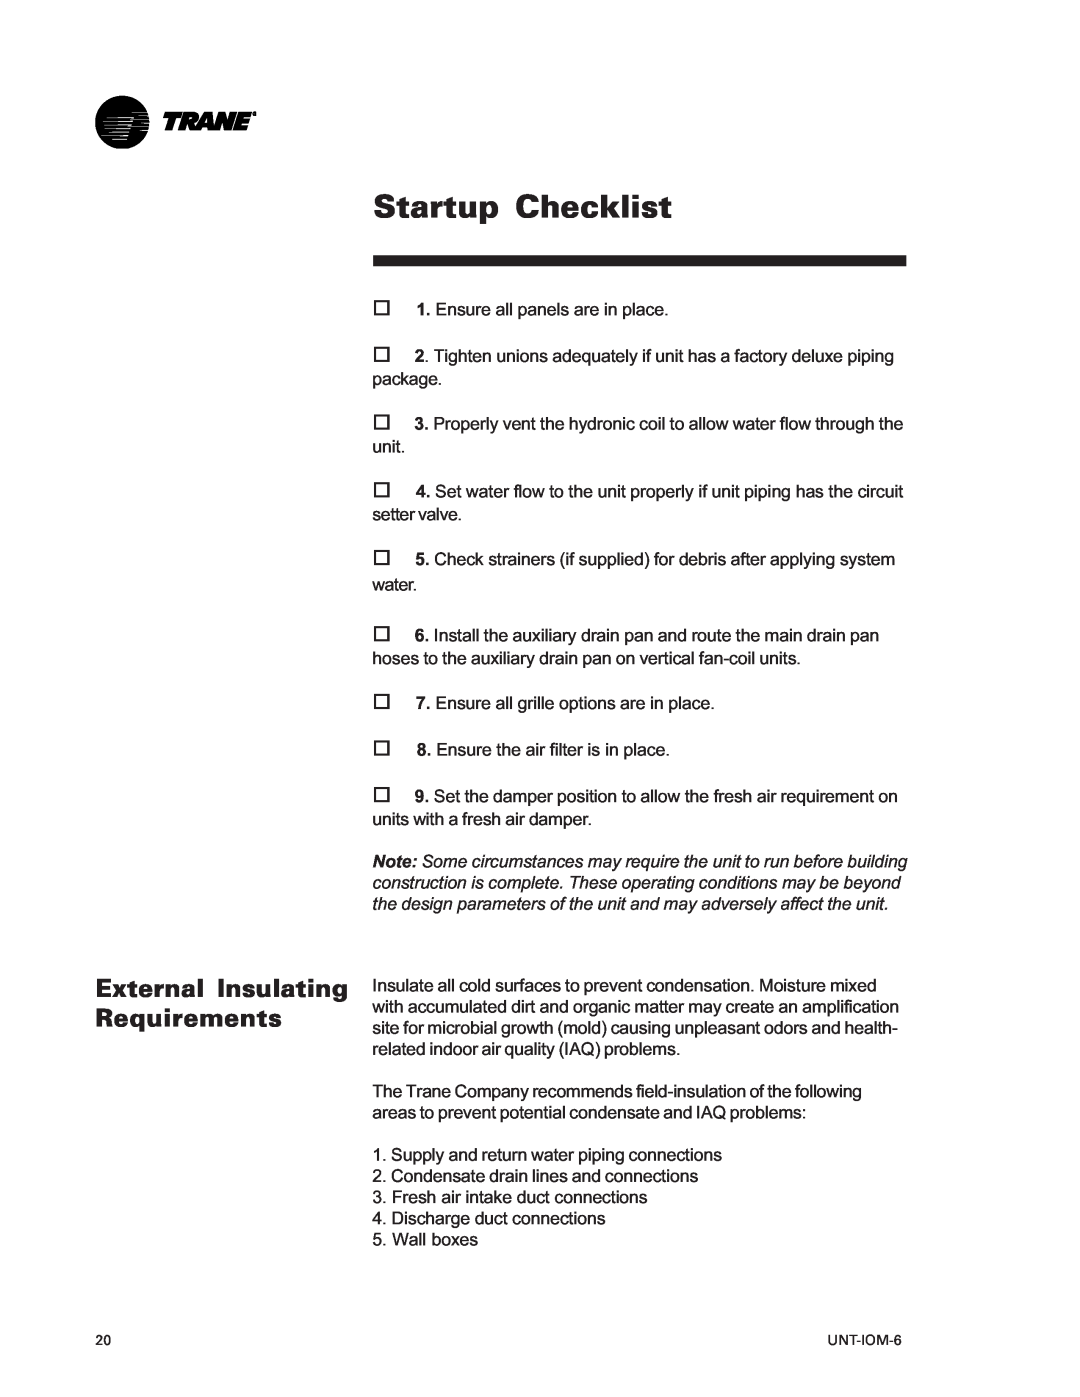 Trane LO manual Startup Checklist, External Insulating Requirements 